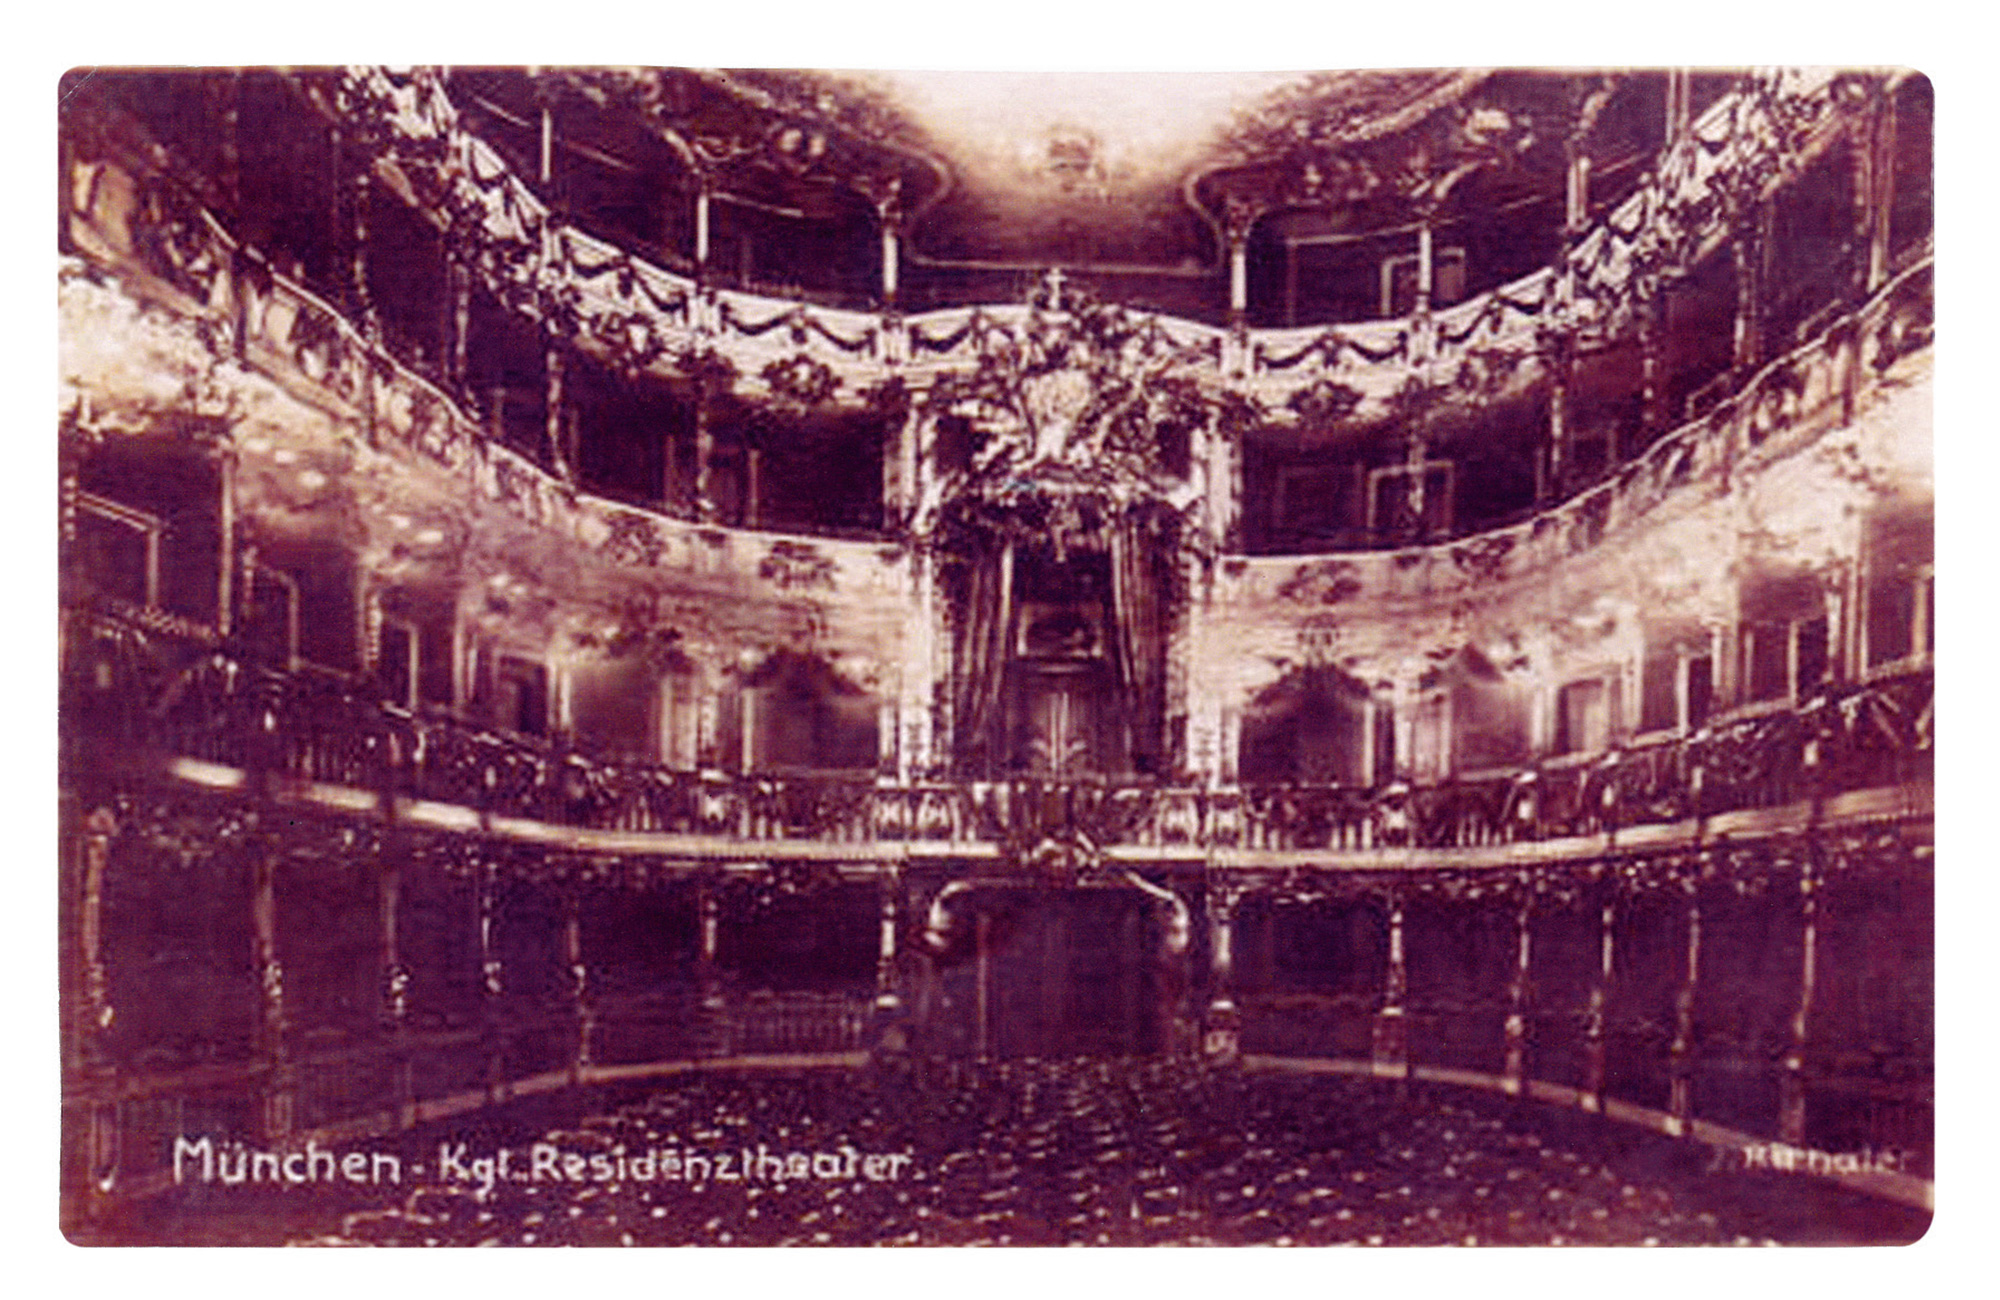 Postcard from 1920 showing the interior of Munich’s Residenztheater.